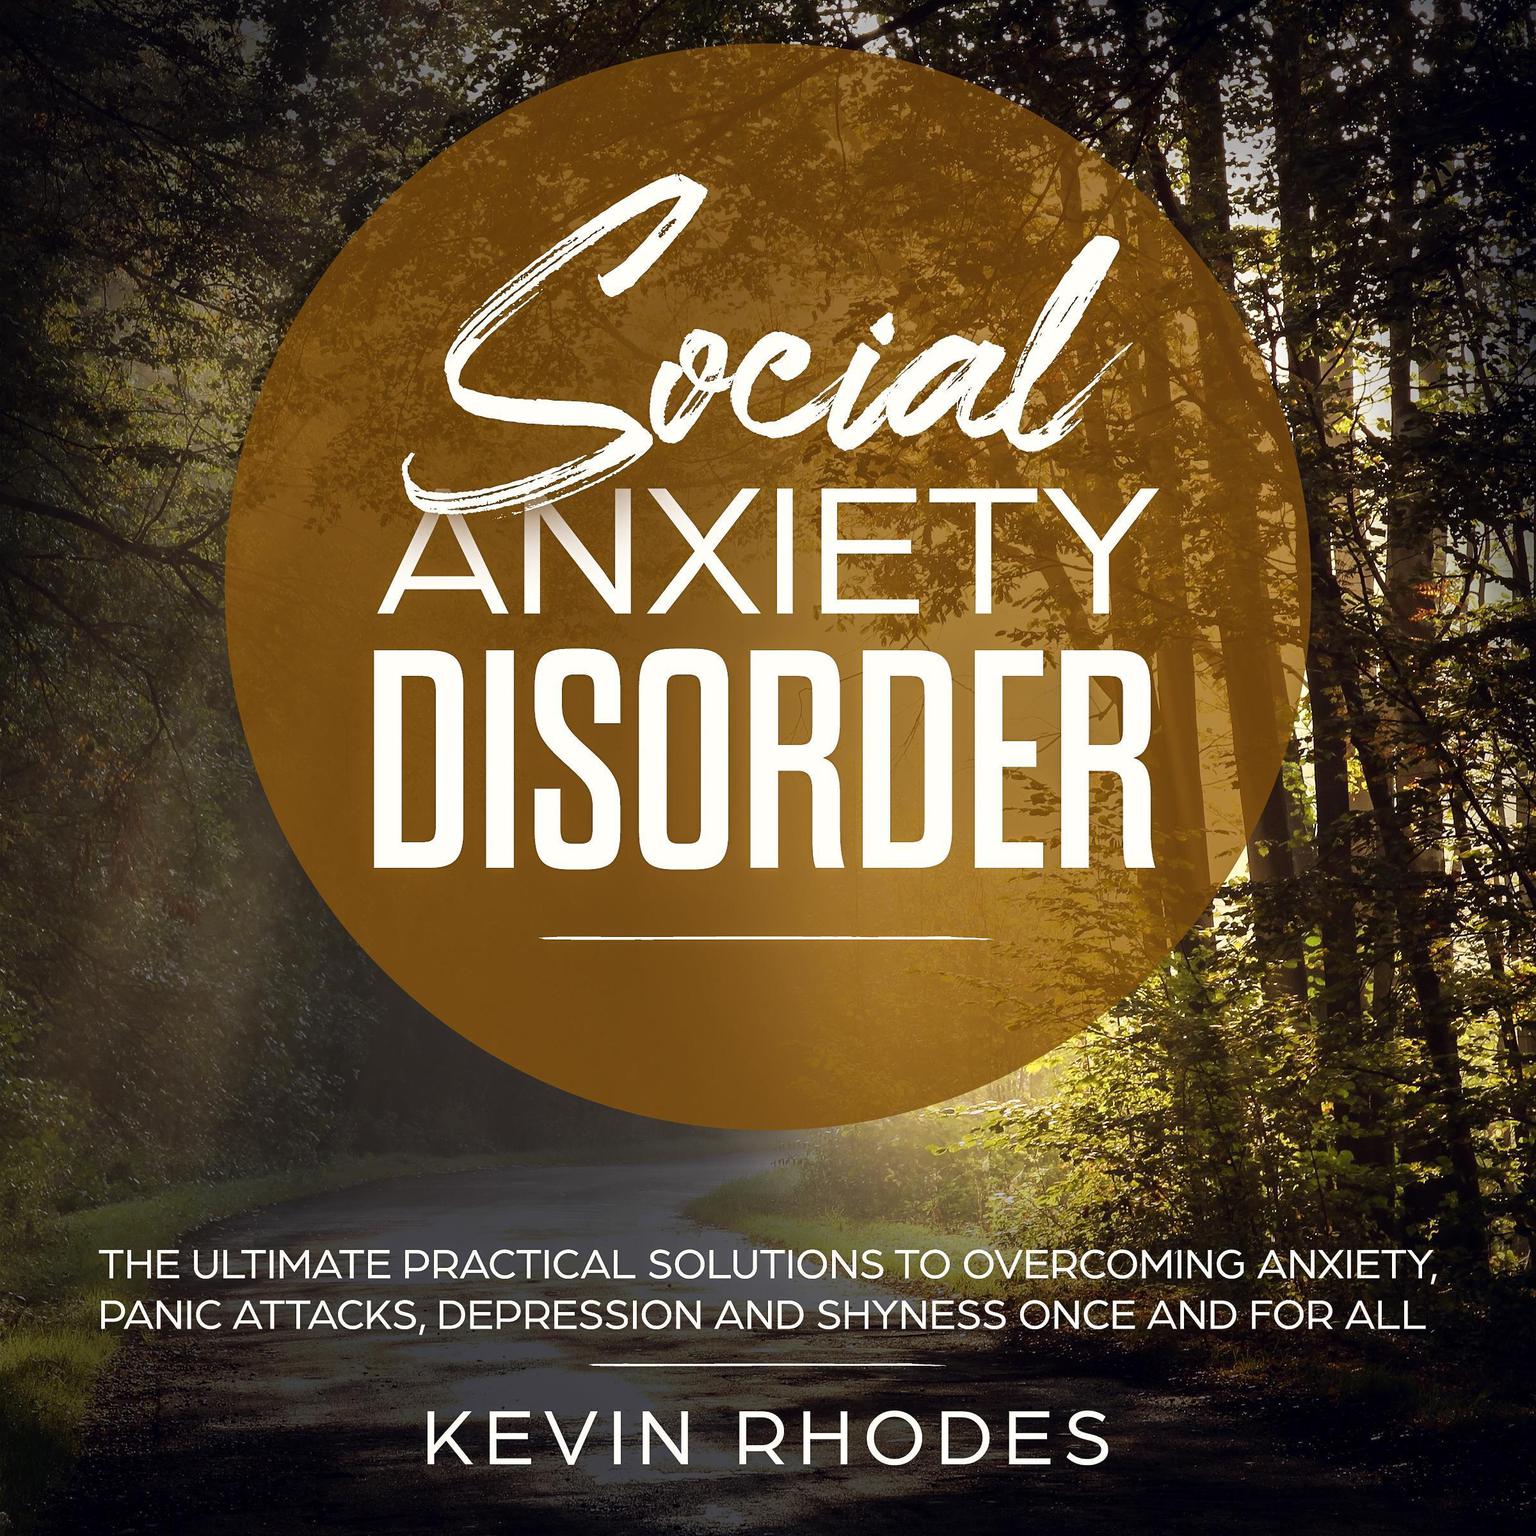 Social Anxiety Disorder: The Ultimate Practical Solutions To Overcoming Anxiety, Panic Attacks, Depression and Shyness Once And For All Audiobook, by Kevin Rhodes